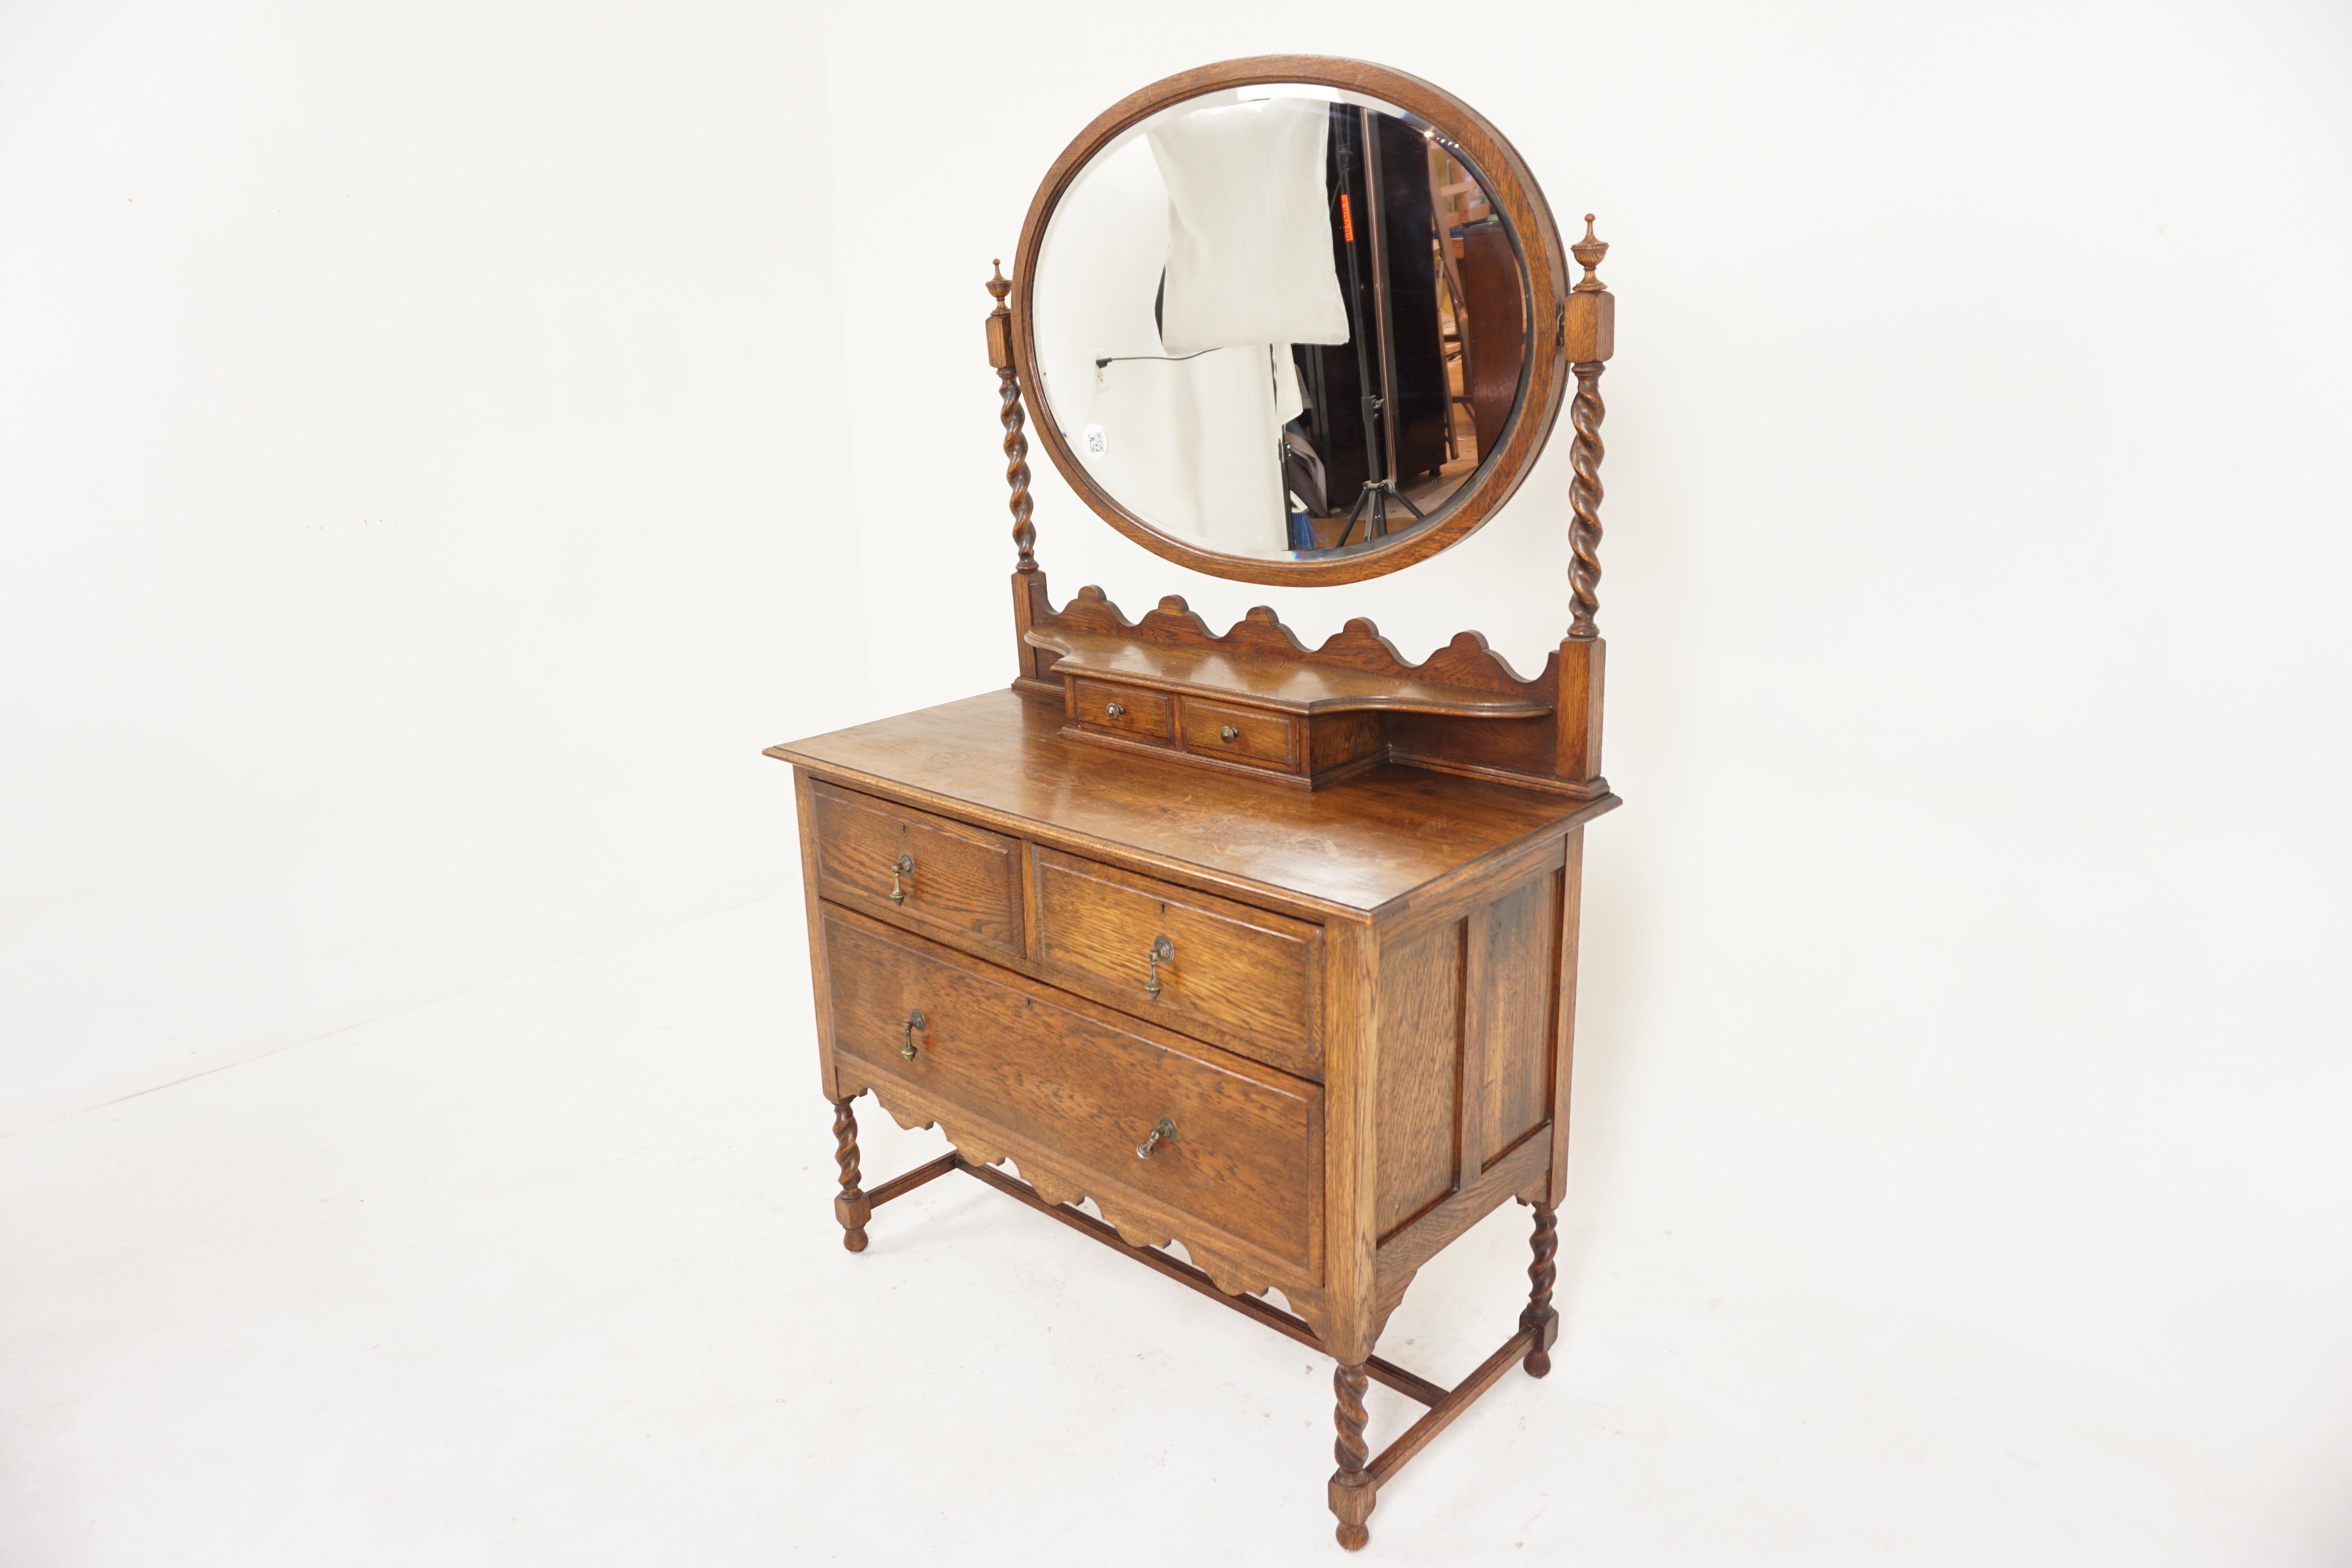 Arts + Crafts oak mirror back barley twist vanity, dresser, Scotland 1910, H783

Scotland 1910
Solid Oak
Original Finish
Framed bevelled oak mirror
Supported by a pair of barley twist uprights
Pair of small dovetailed drawers
Rectangular